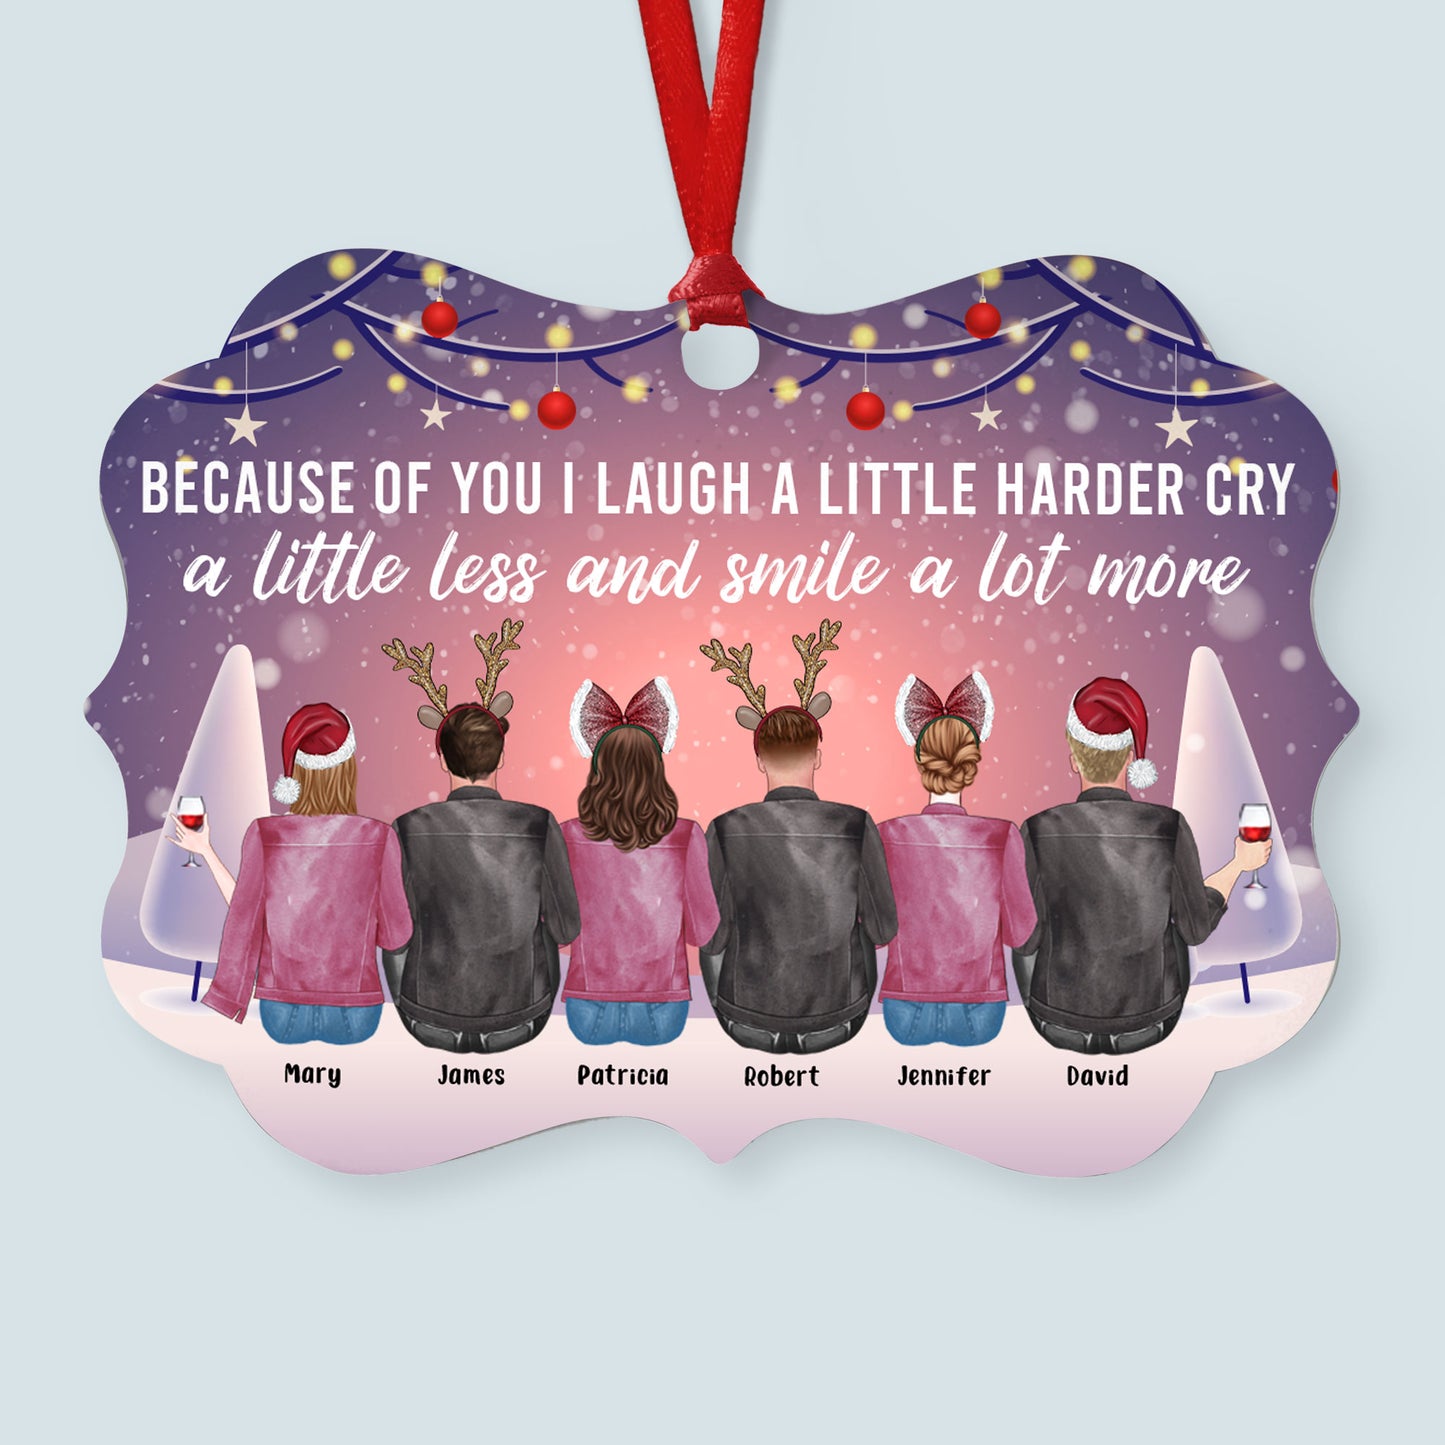 Because of You I Laugh a Little Harder - Personalized Aluminum Ornament - Christmas Gift For Sibling Ver 2